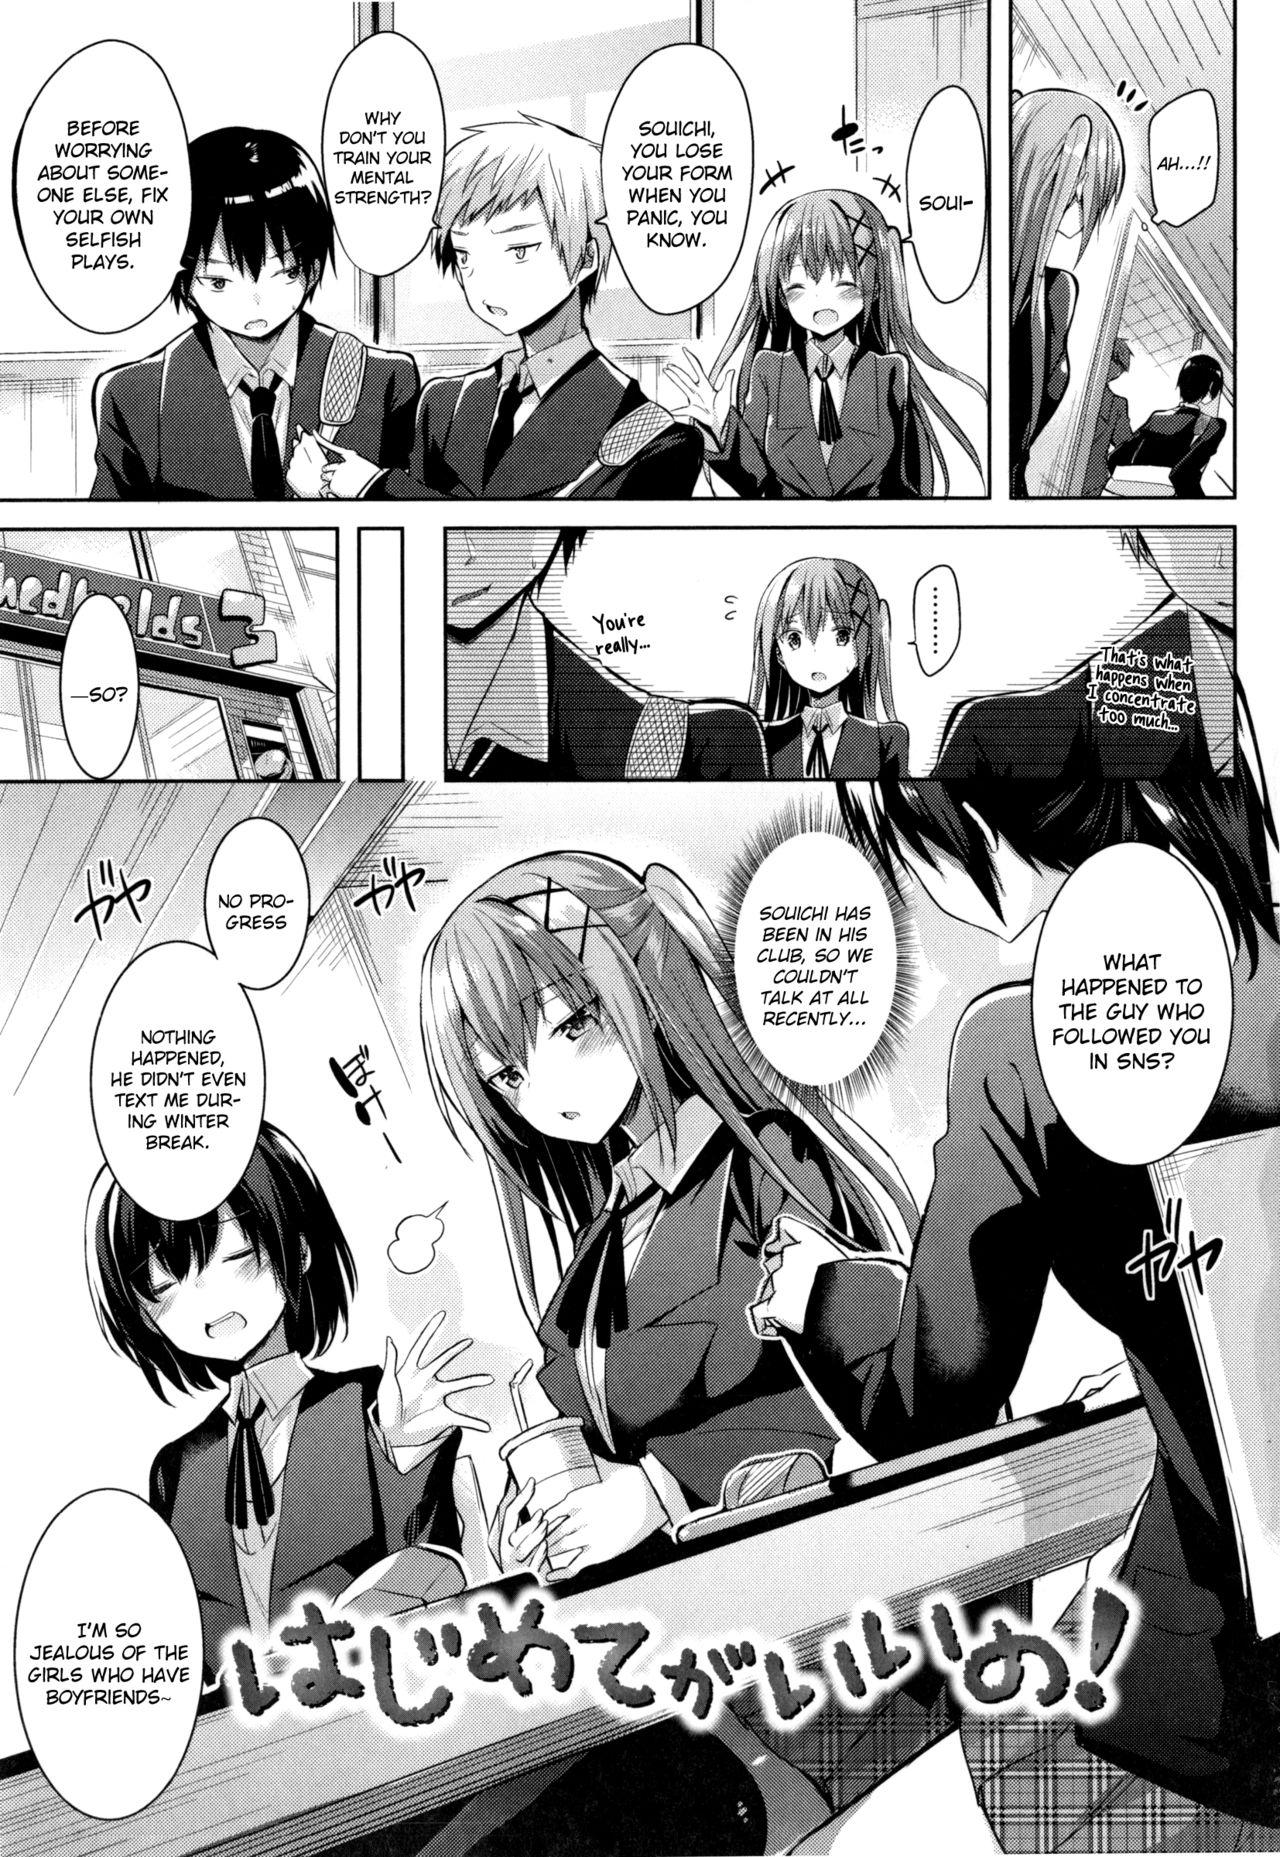 Head Hajimete ga Ii no! | I Want to be Your First! Brother Sister - Page 1